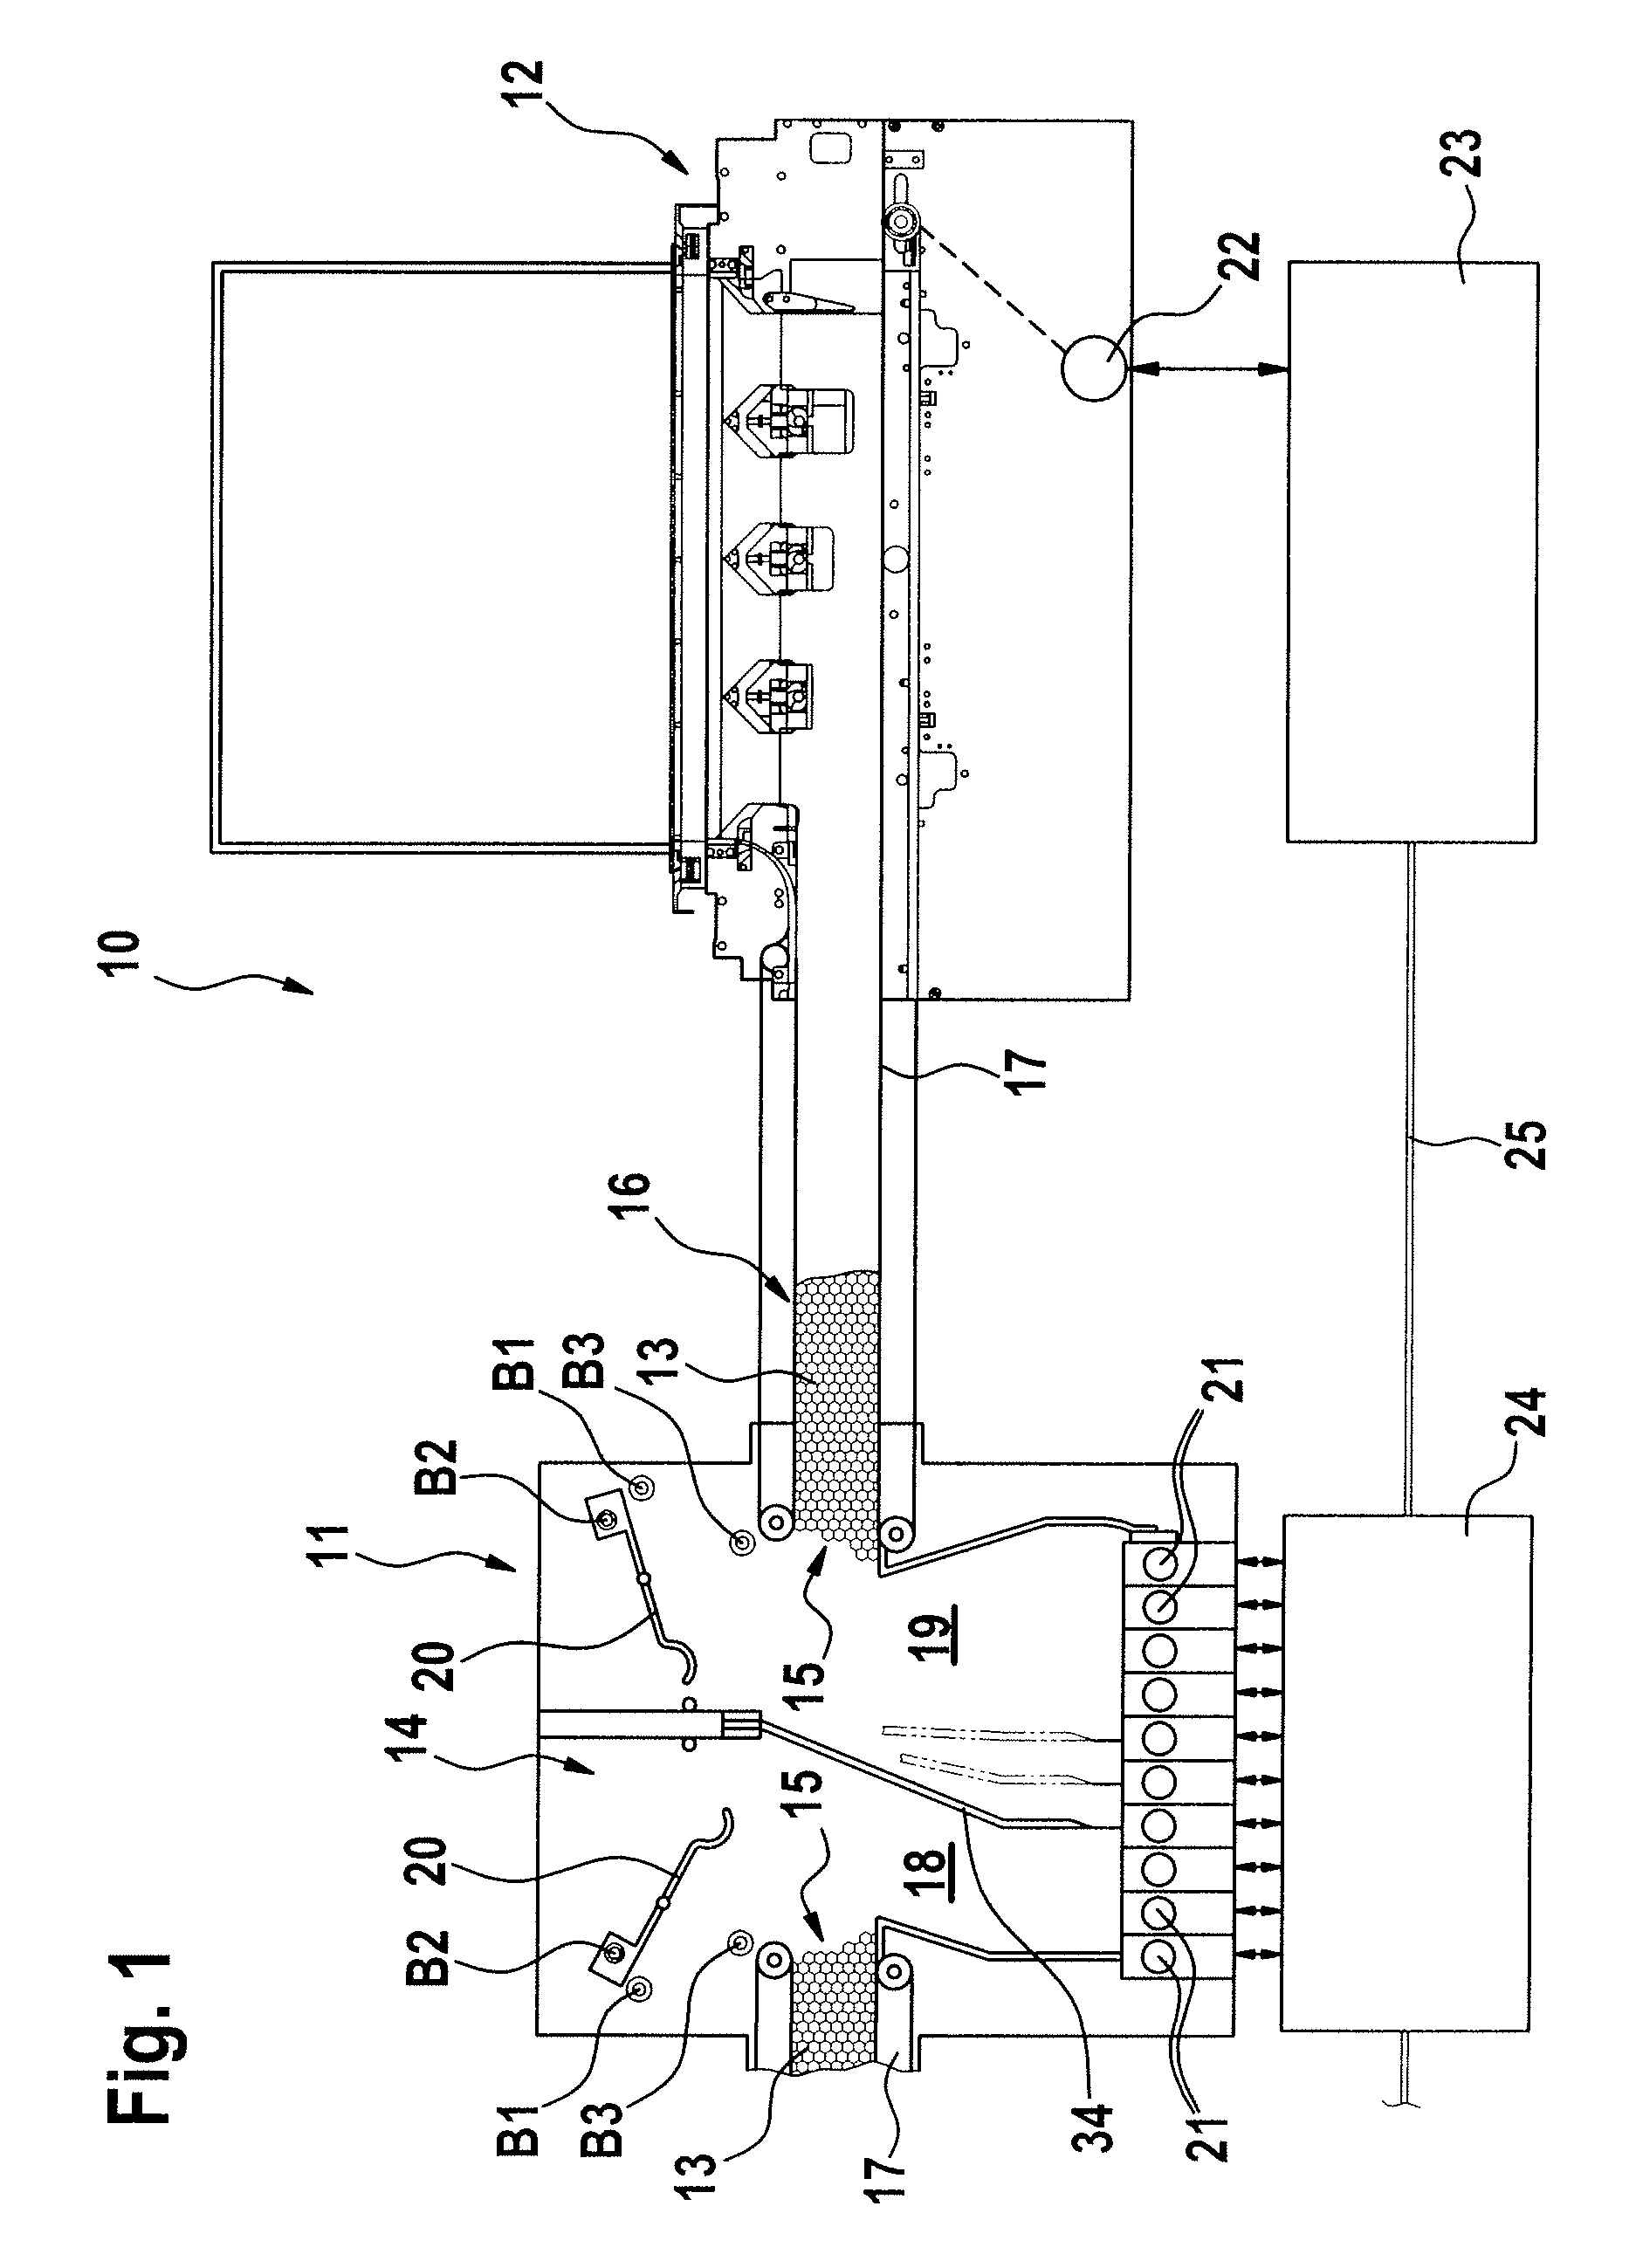 Method for regulating a conveying stream composed of articles of the tobacco-processing industry between a tray discharger and a feed device with multiple feed units